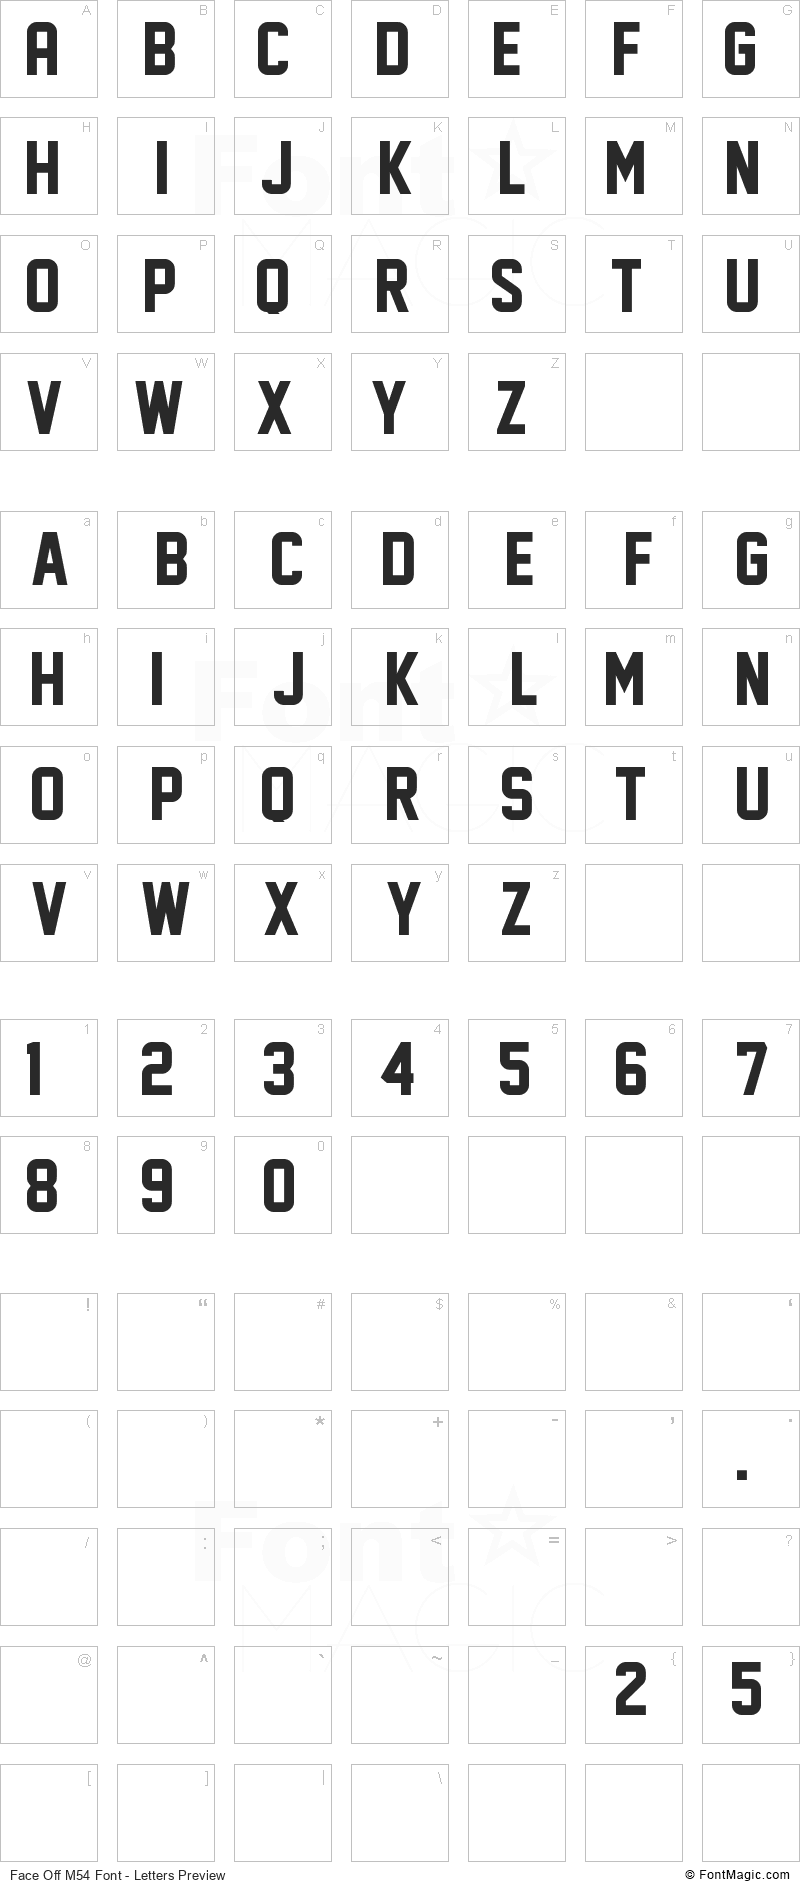 Face Off M54 Font - All Latters Preview Chart